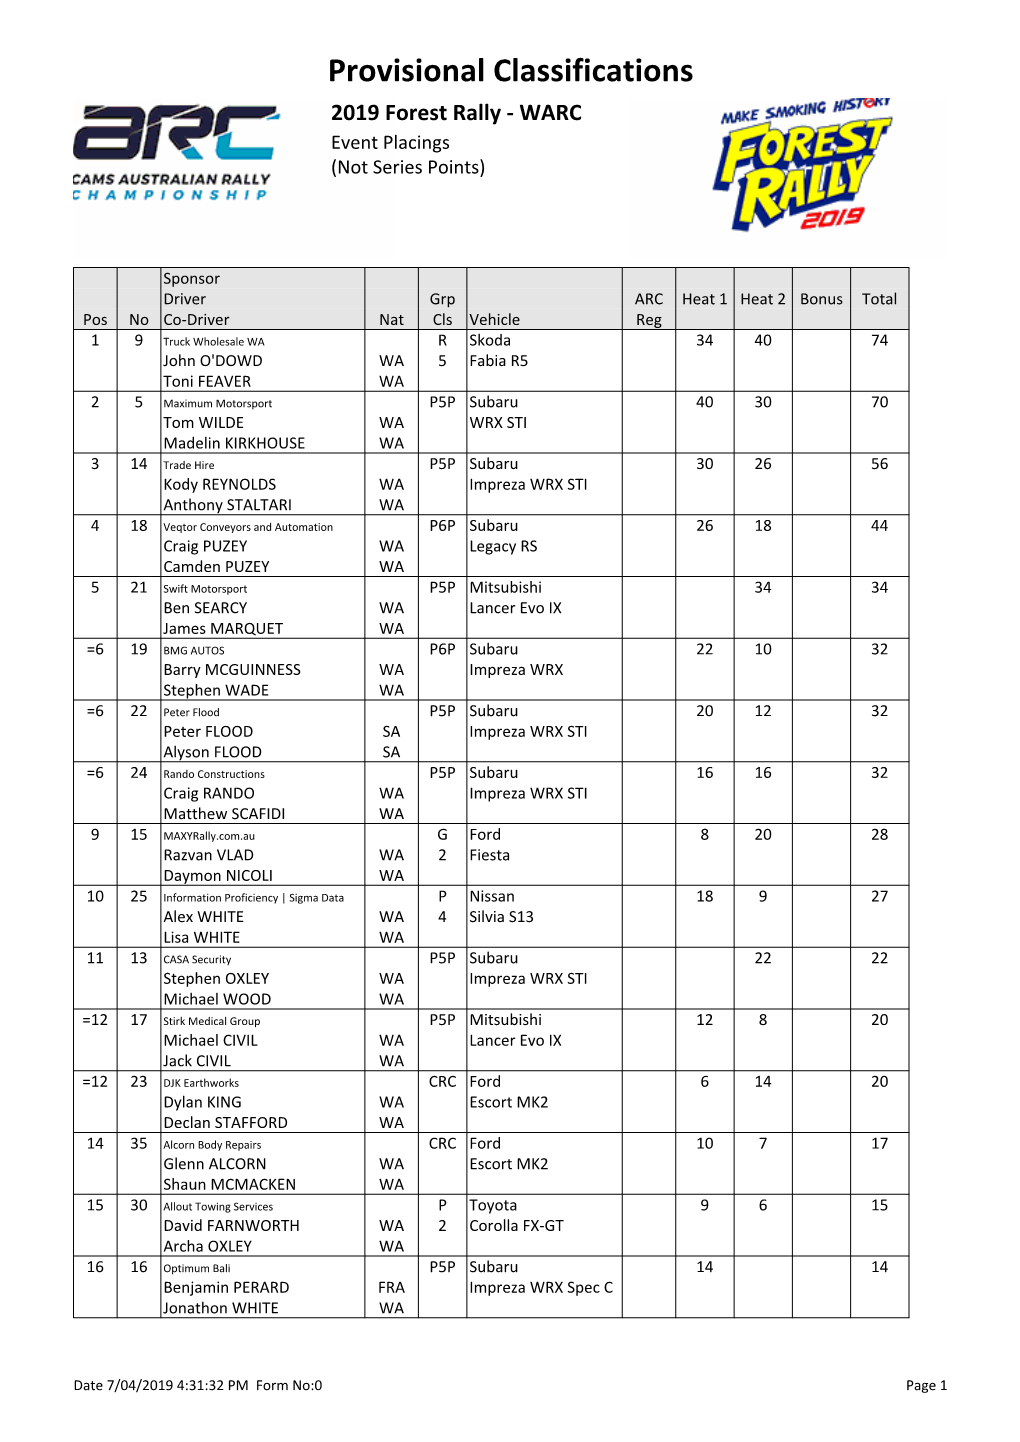 Provisional Classifications 2019 Forest Rally ‐ WARC Event Placings (Not Series Points)